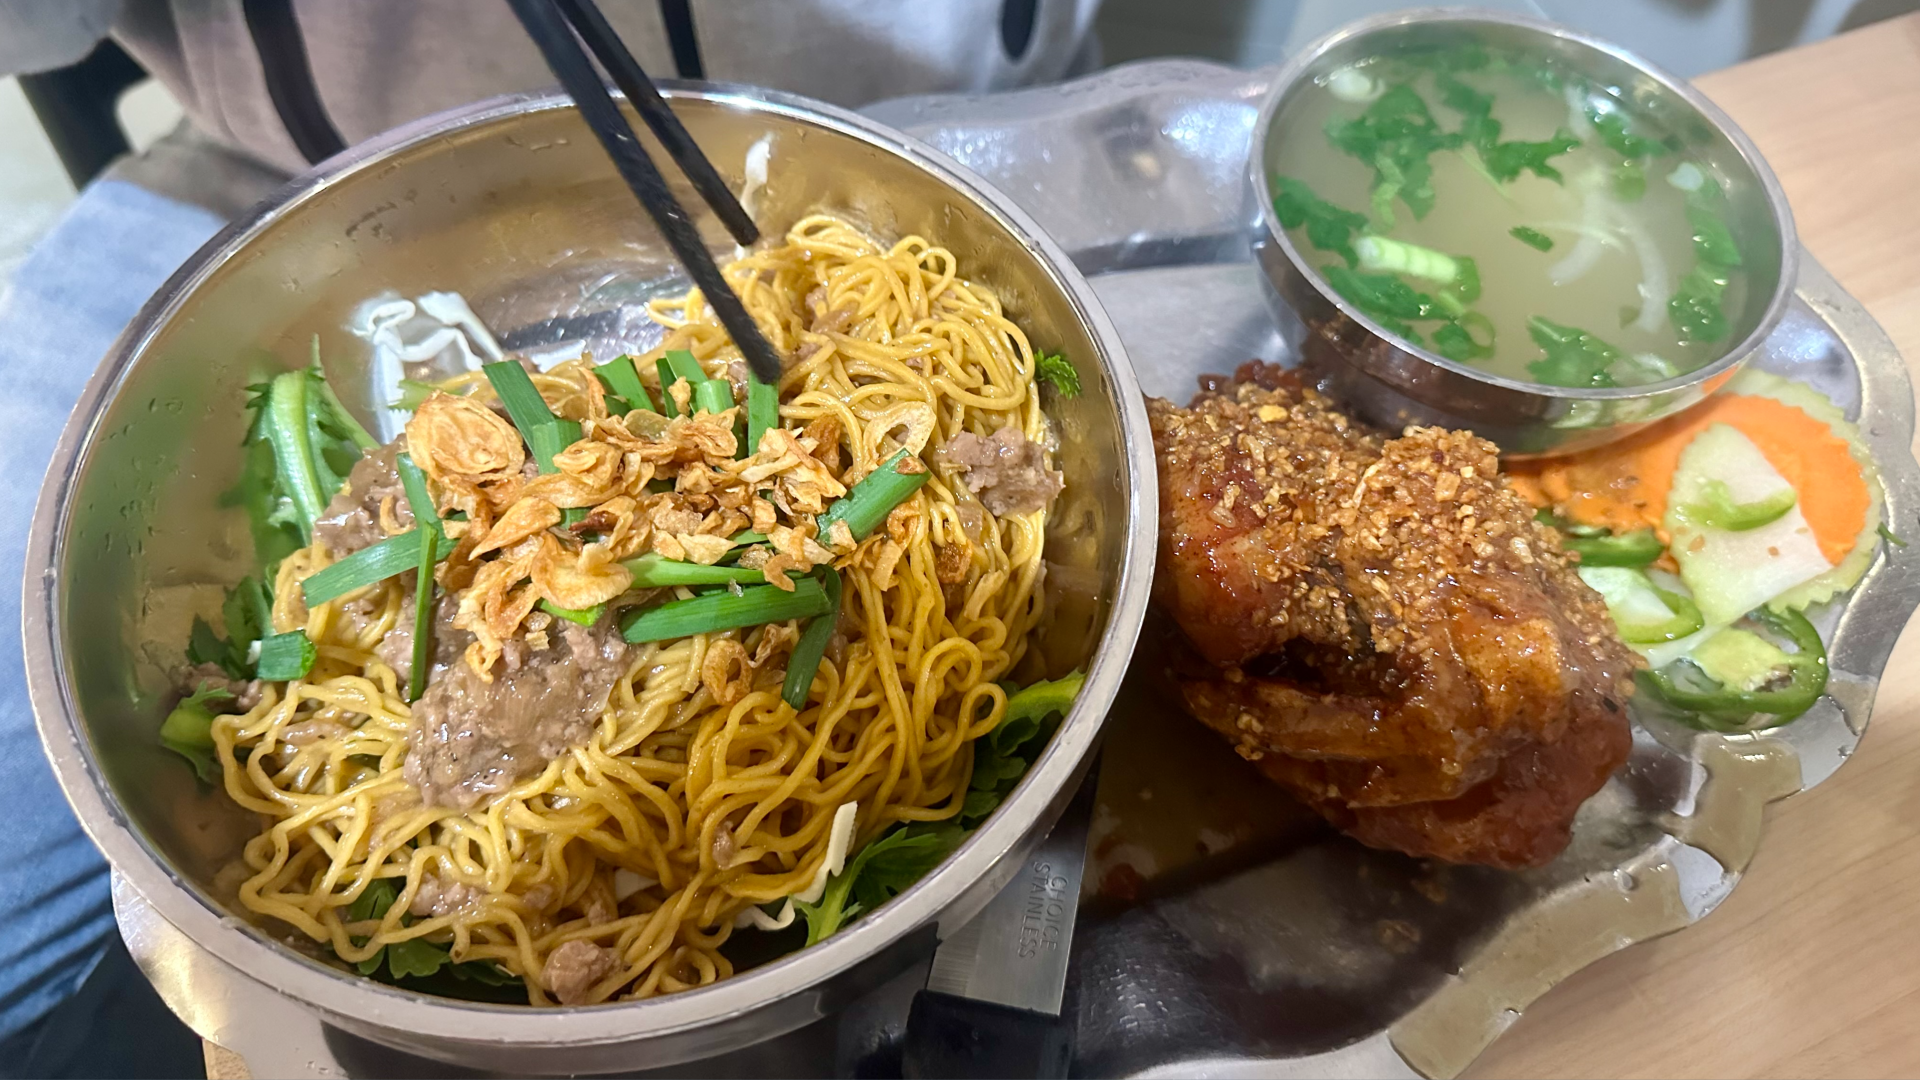 A bowl of dry egg noodles next to garlic fried chicken and broth and salad from The Boat.